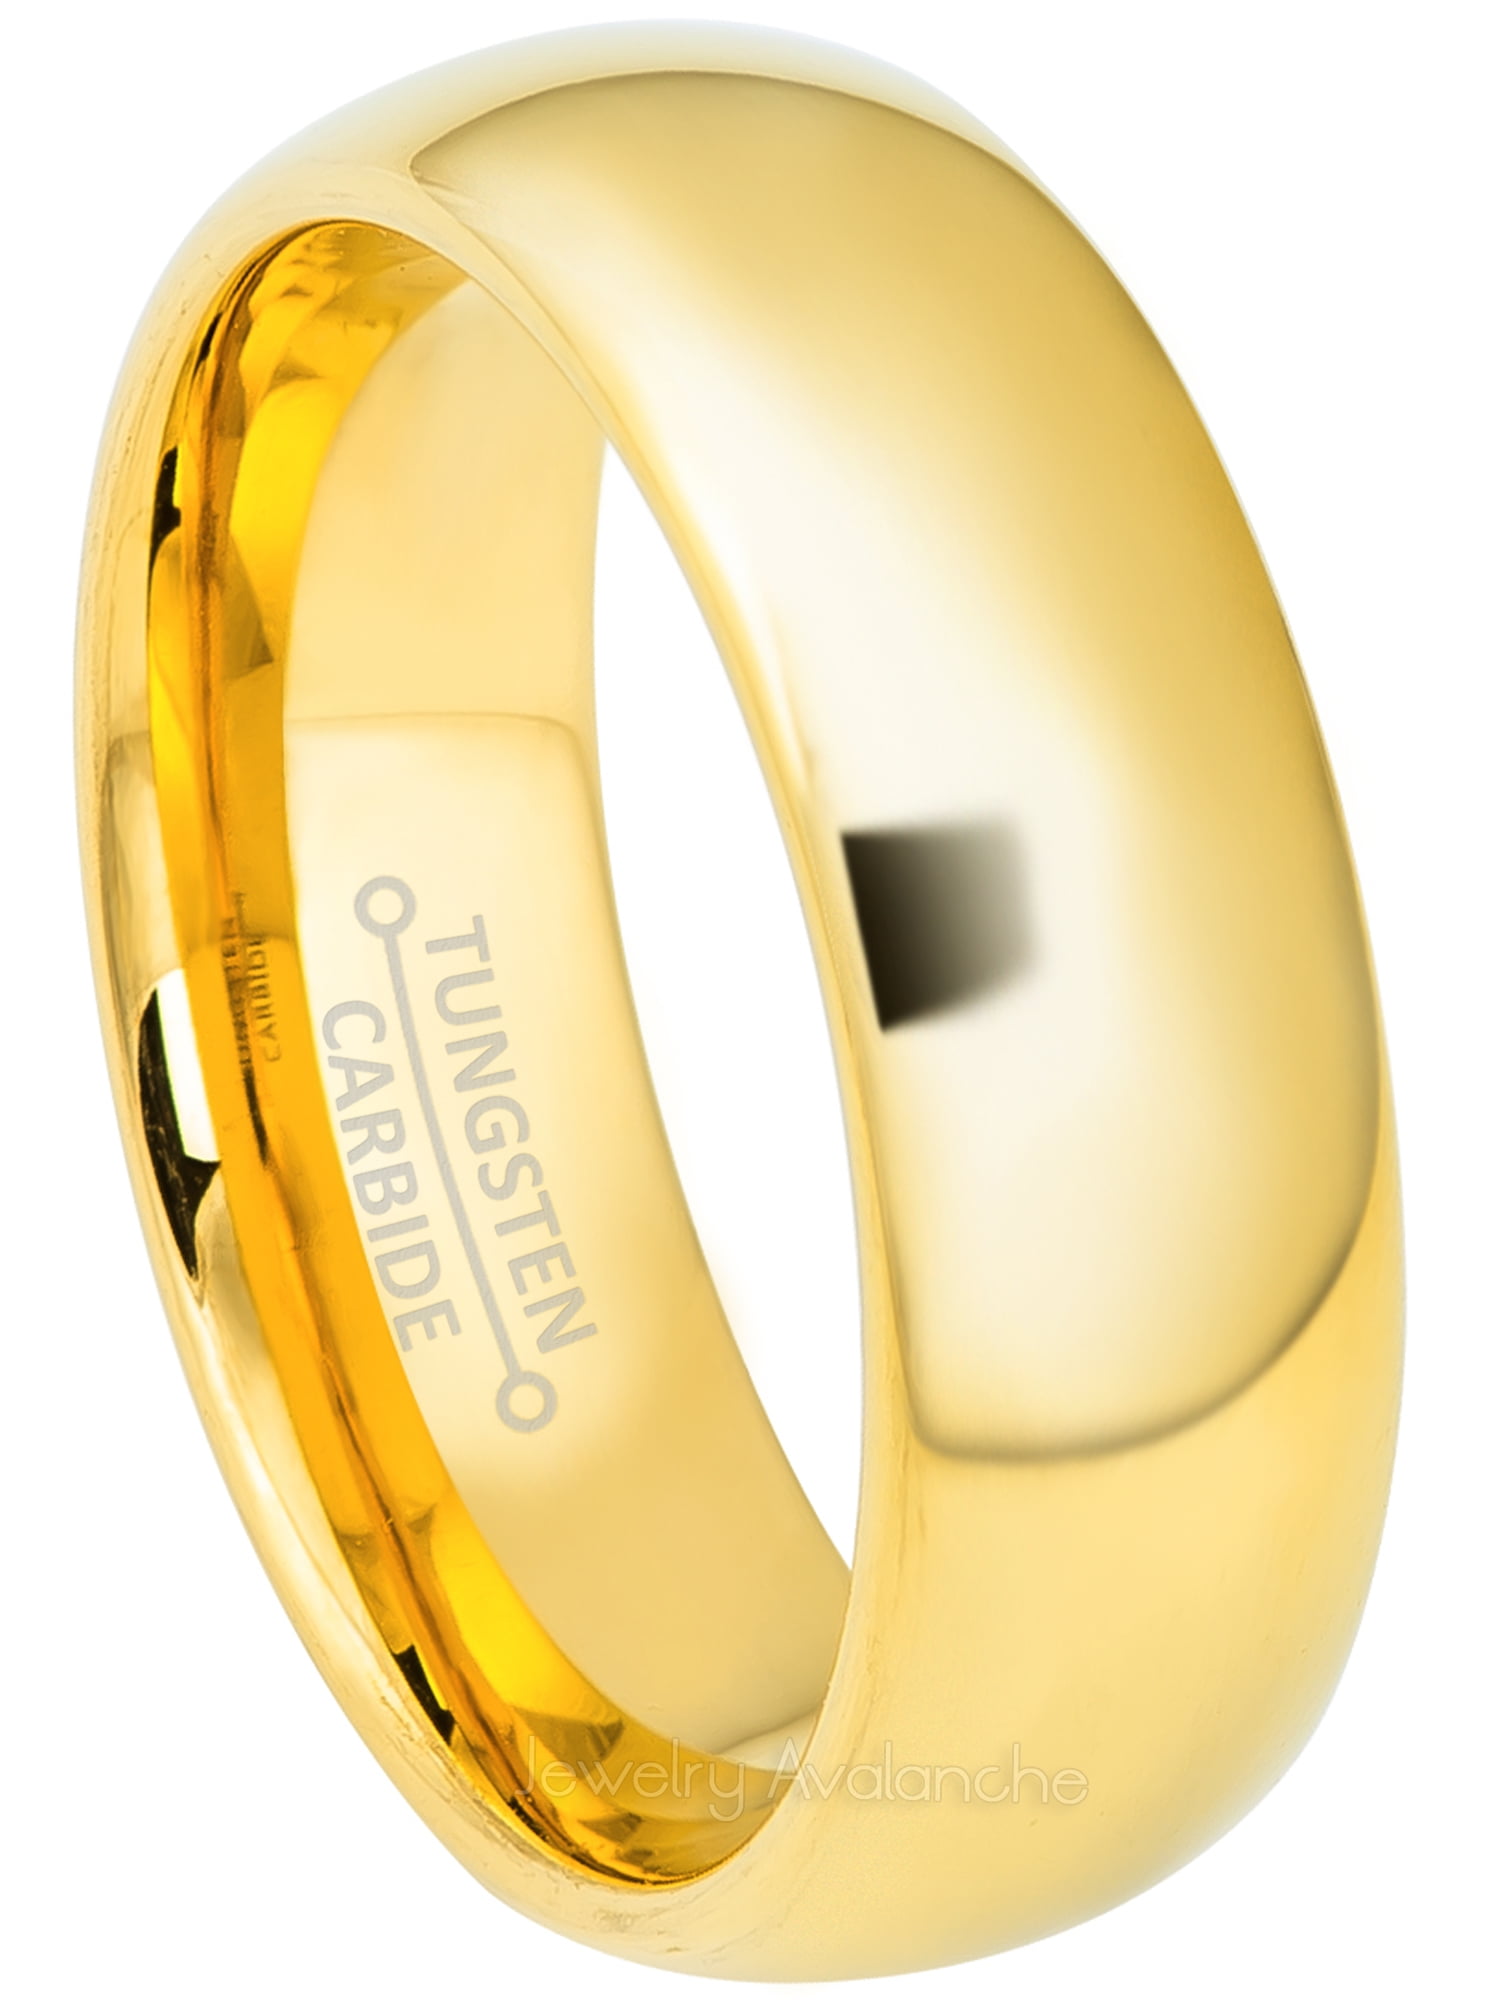 7mm Dome Tungsten Wedding Band - Polished Finish Yellow Gold Plated Comfort  Fit Tungsten Carbide Ring - Men's Anniversary Ring - TN105s12.5